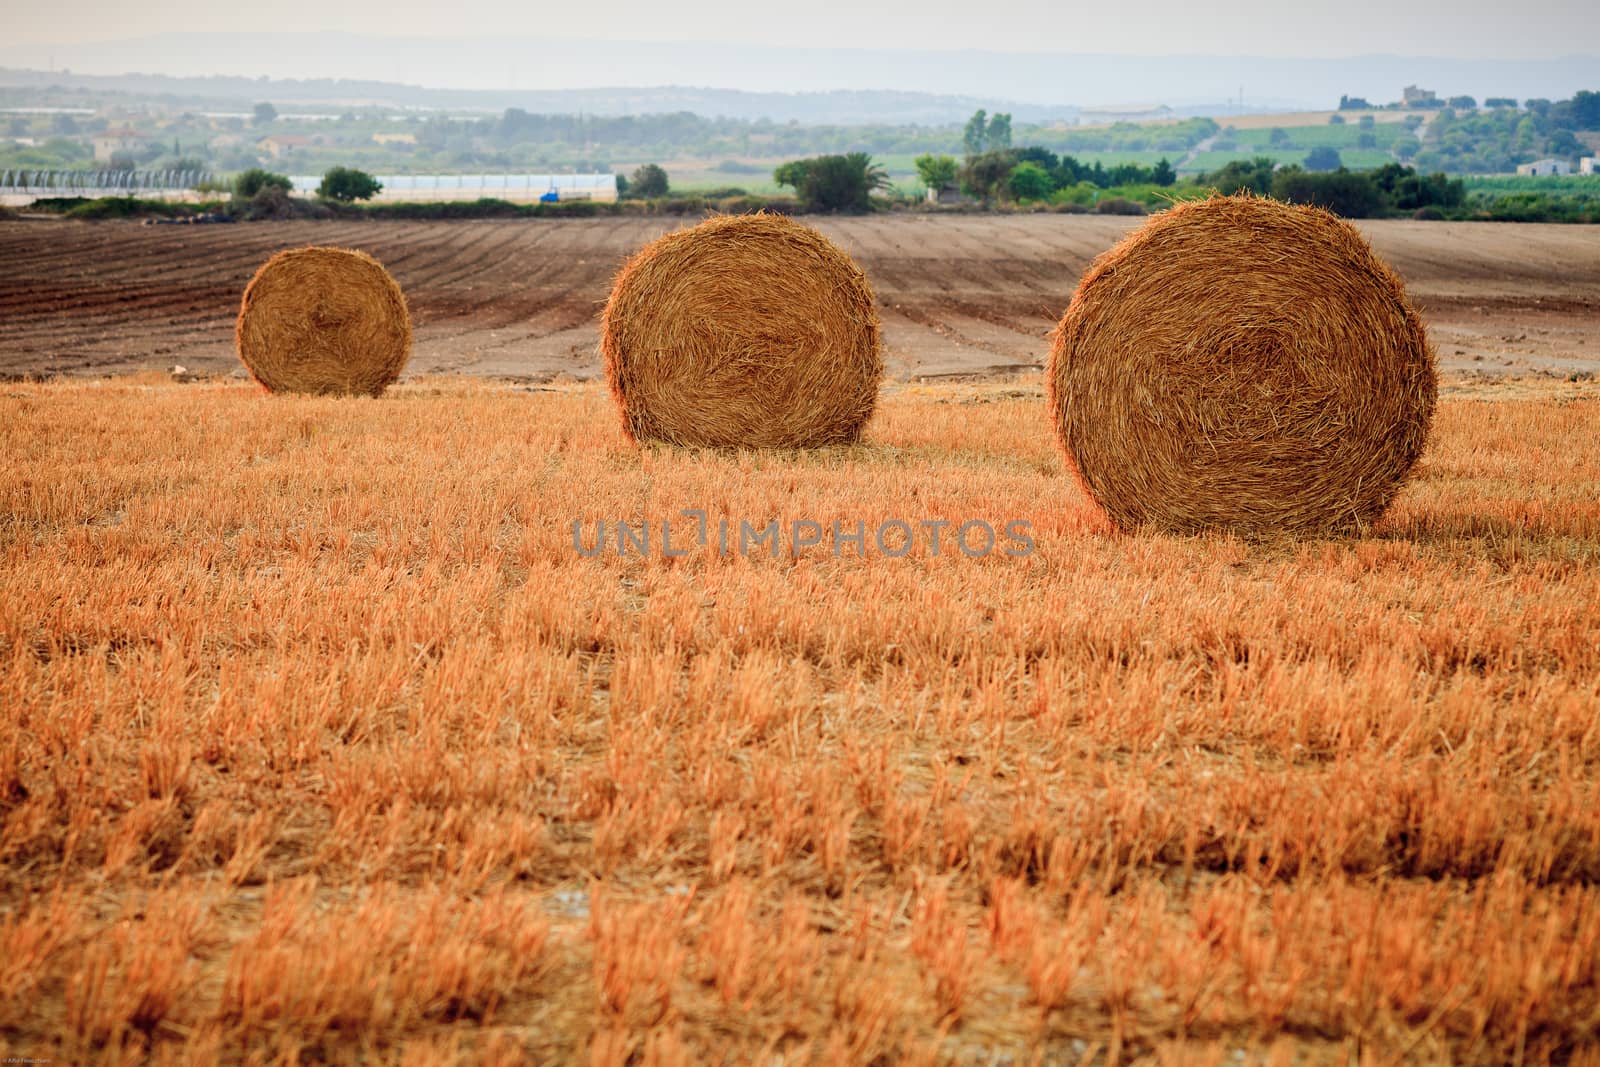 Three rolls of hays in the meadows orange coloured by the sun, Sicily, Italy